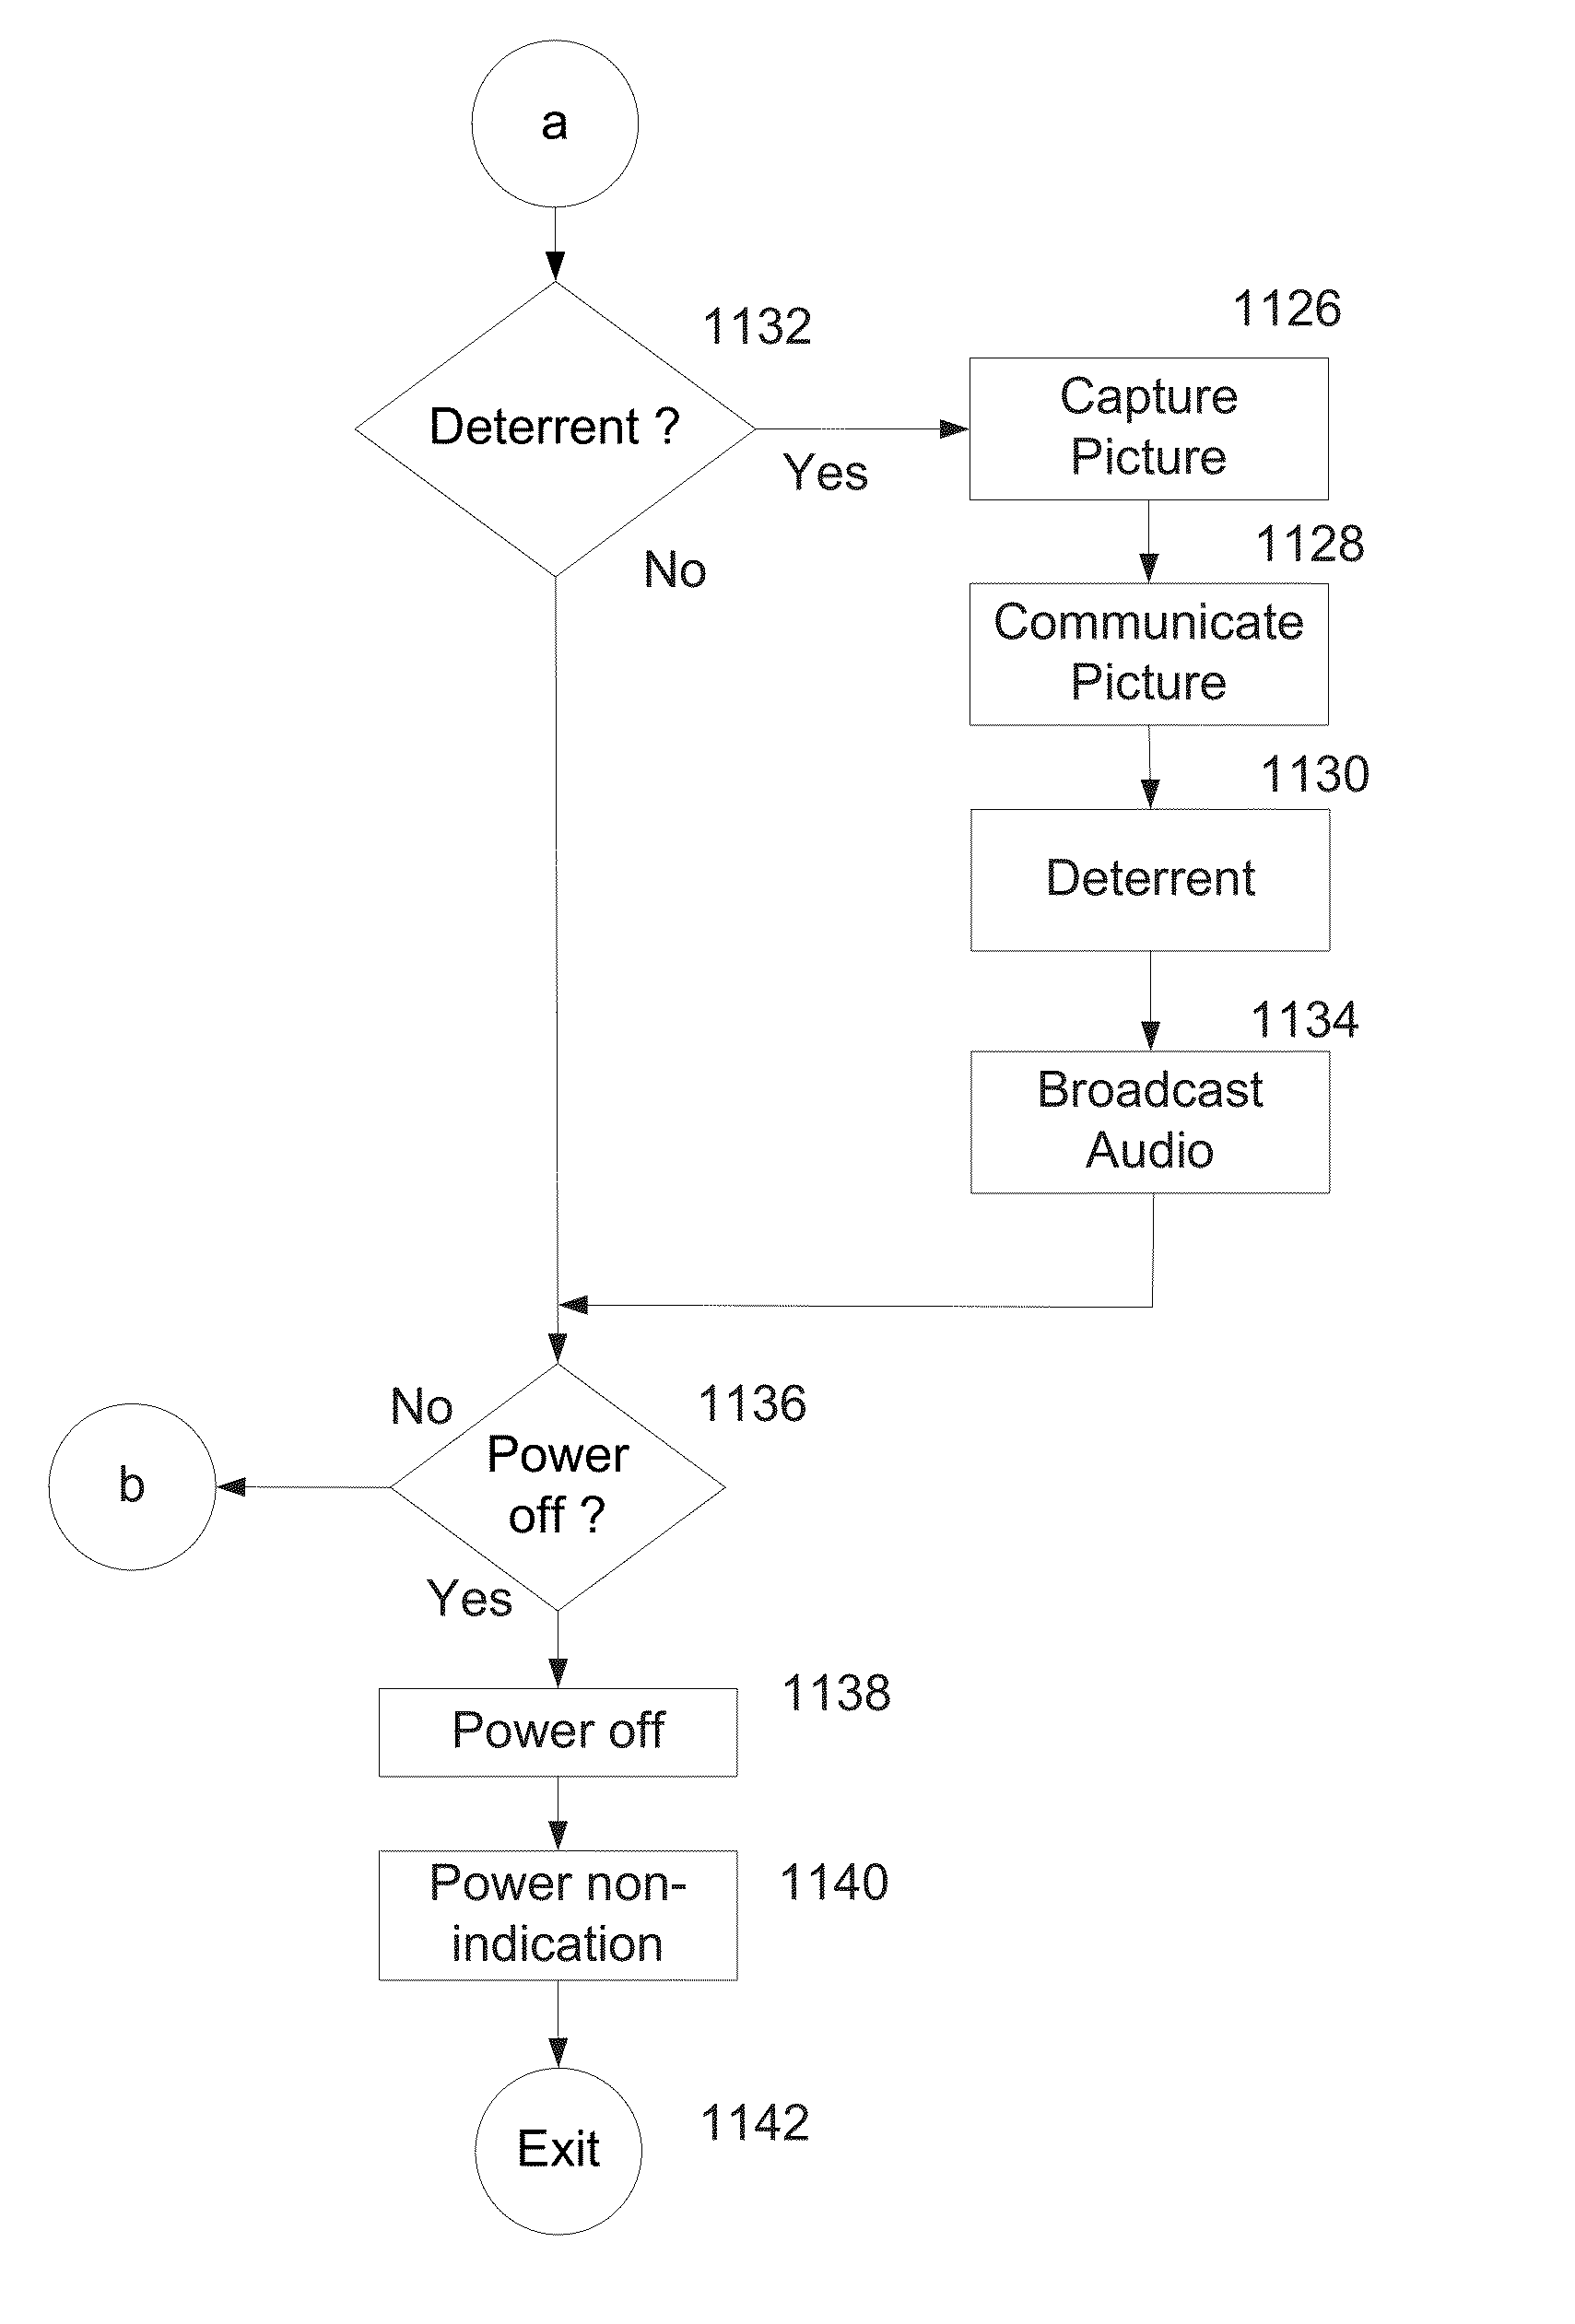 Method and apparatus for active defense and emergency response